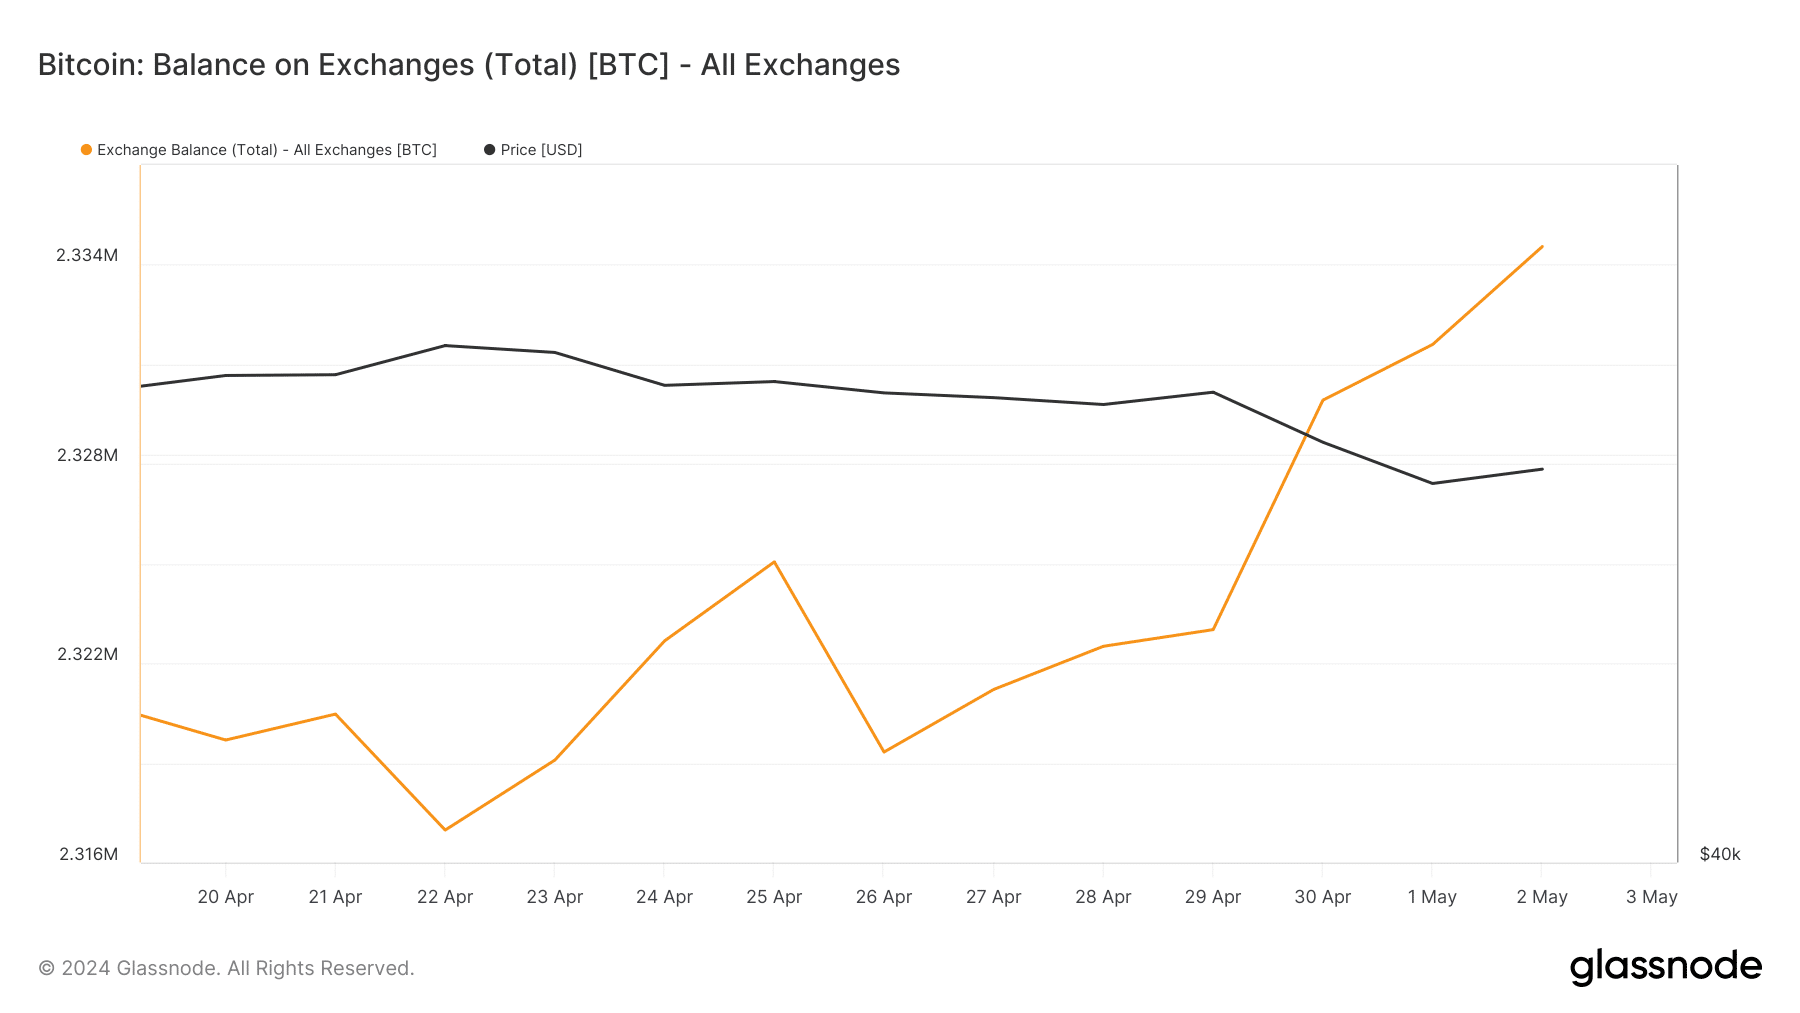 The balance of BTC on the exchanges increased